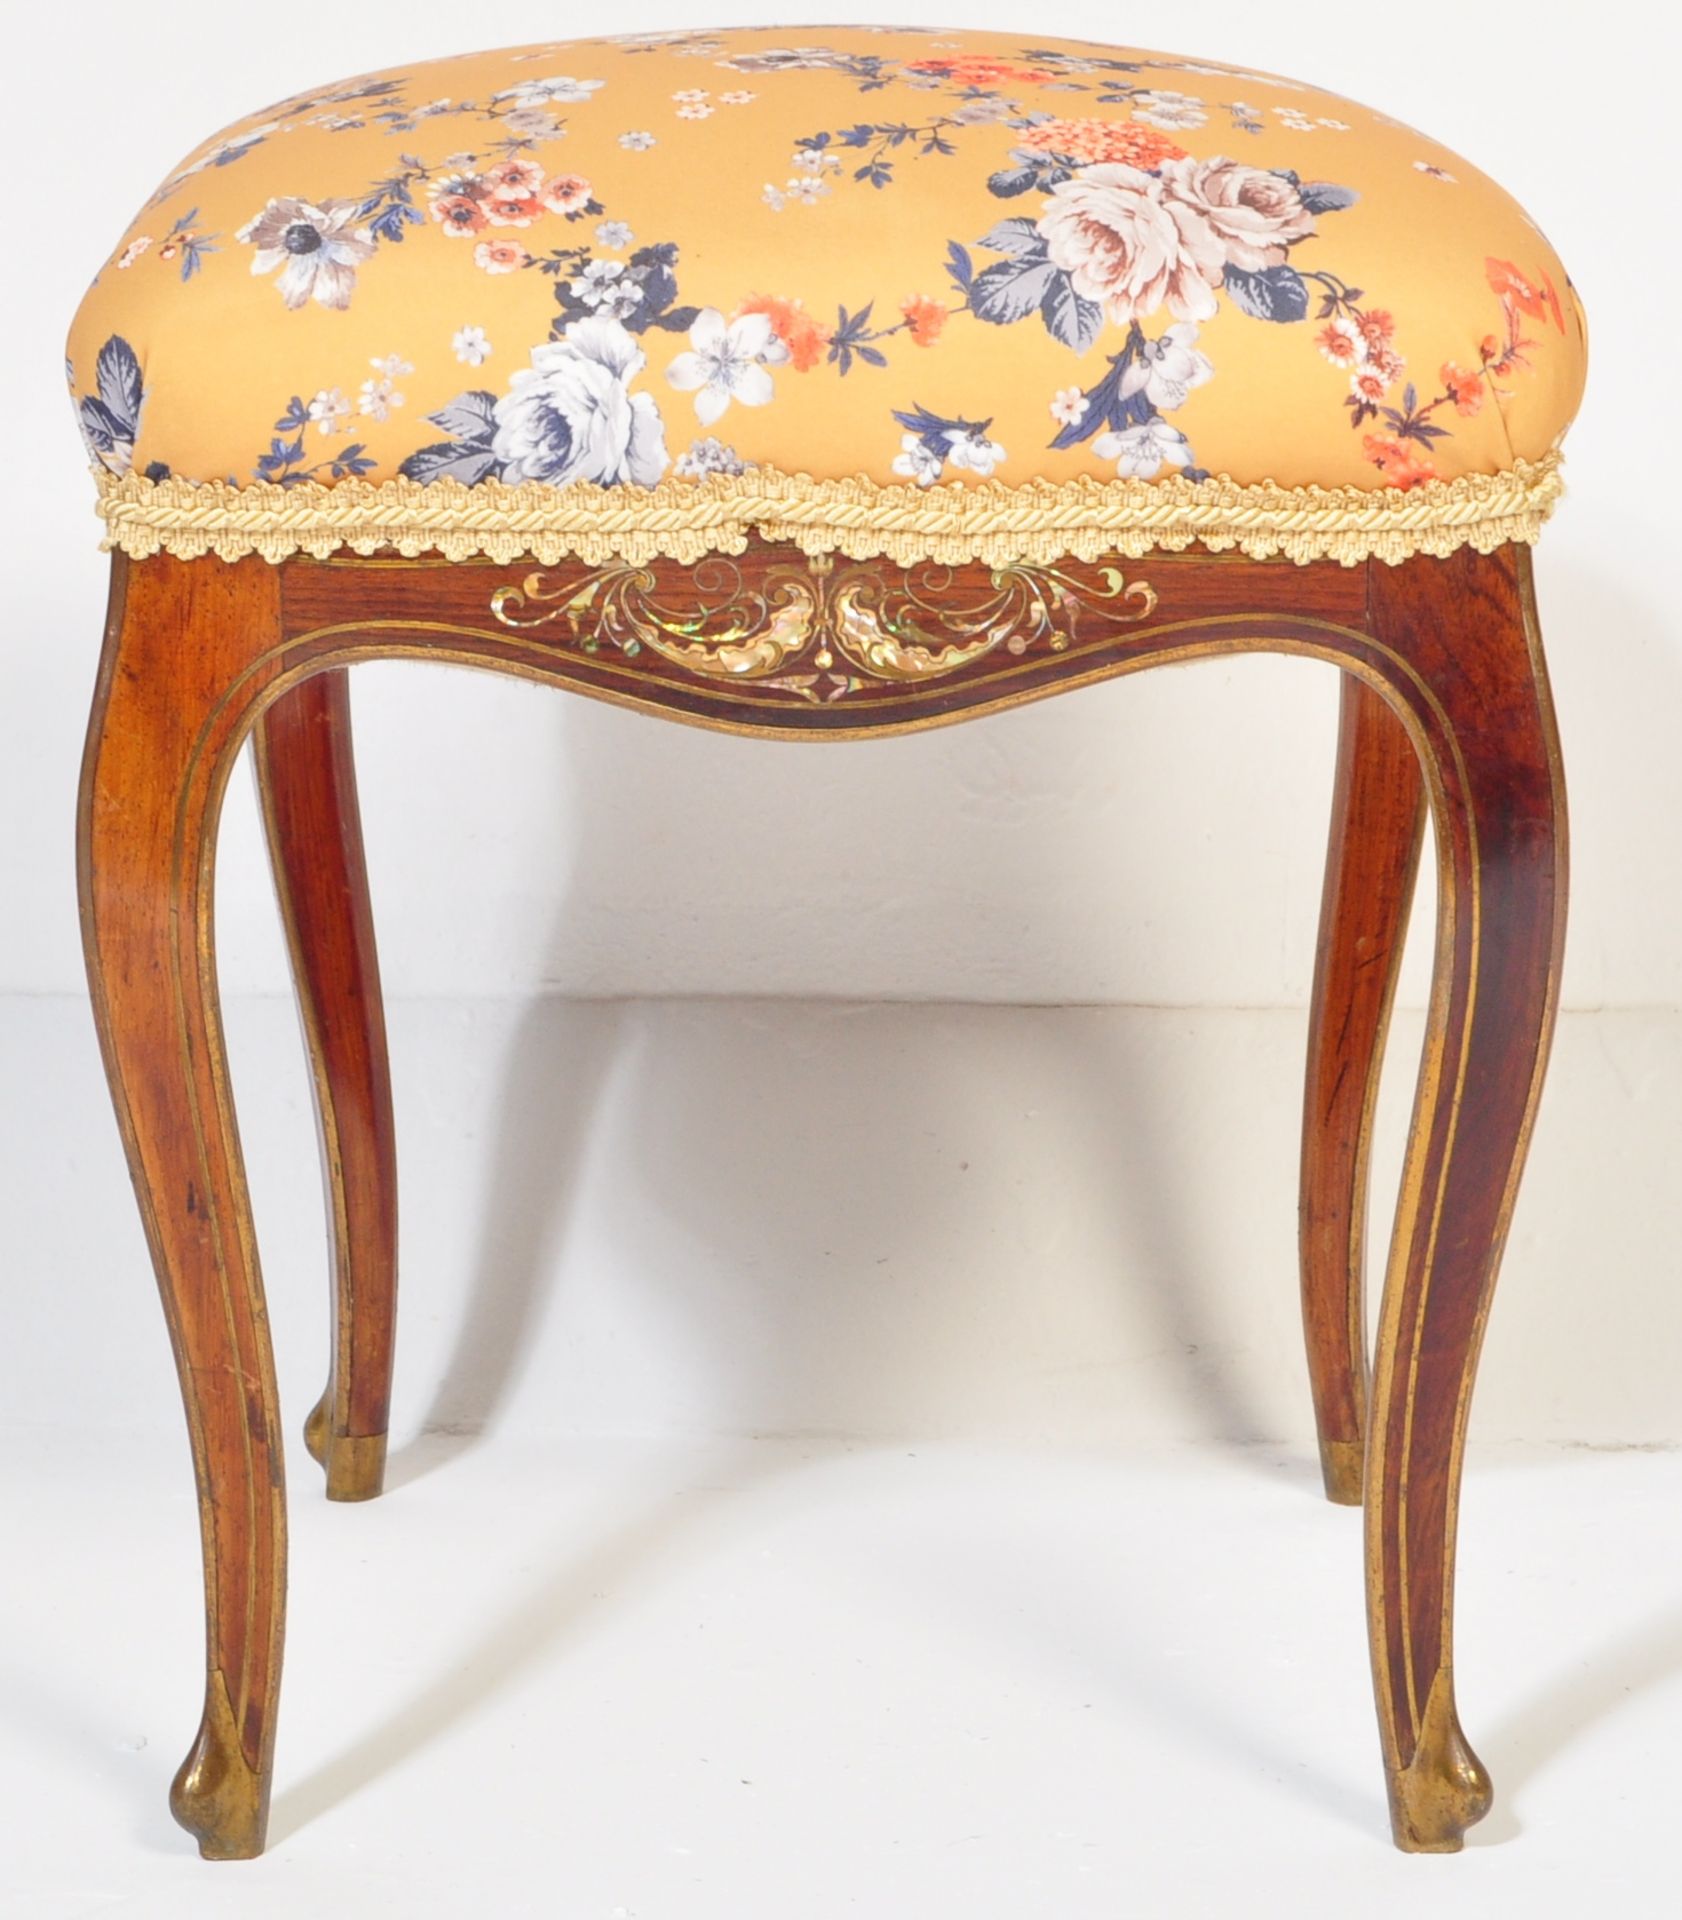 19TH CENTURY ROSEWOOD BRASS & MOTHER OF PEARL STOOL - Image 2 of 6